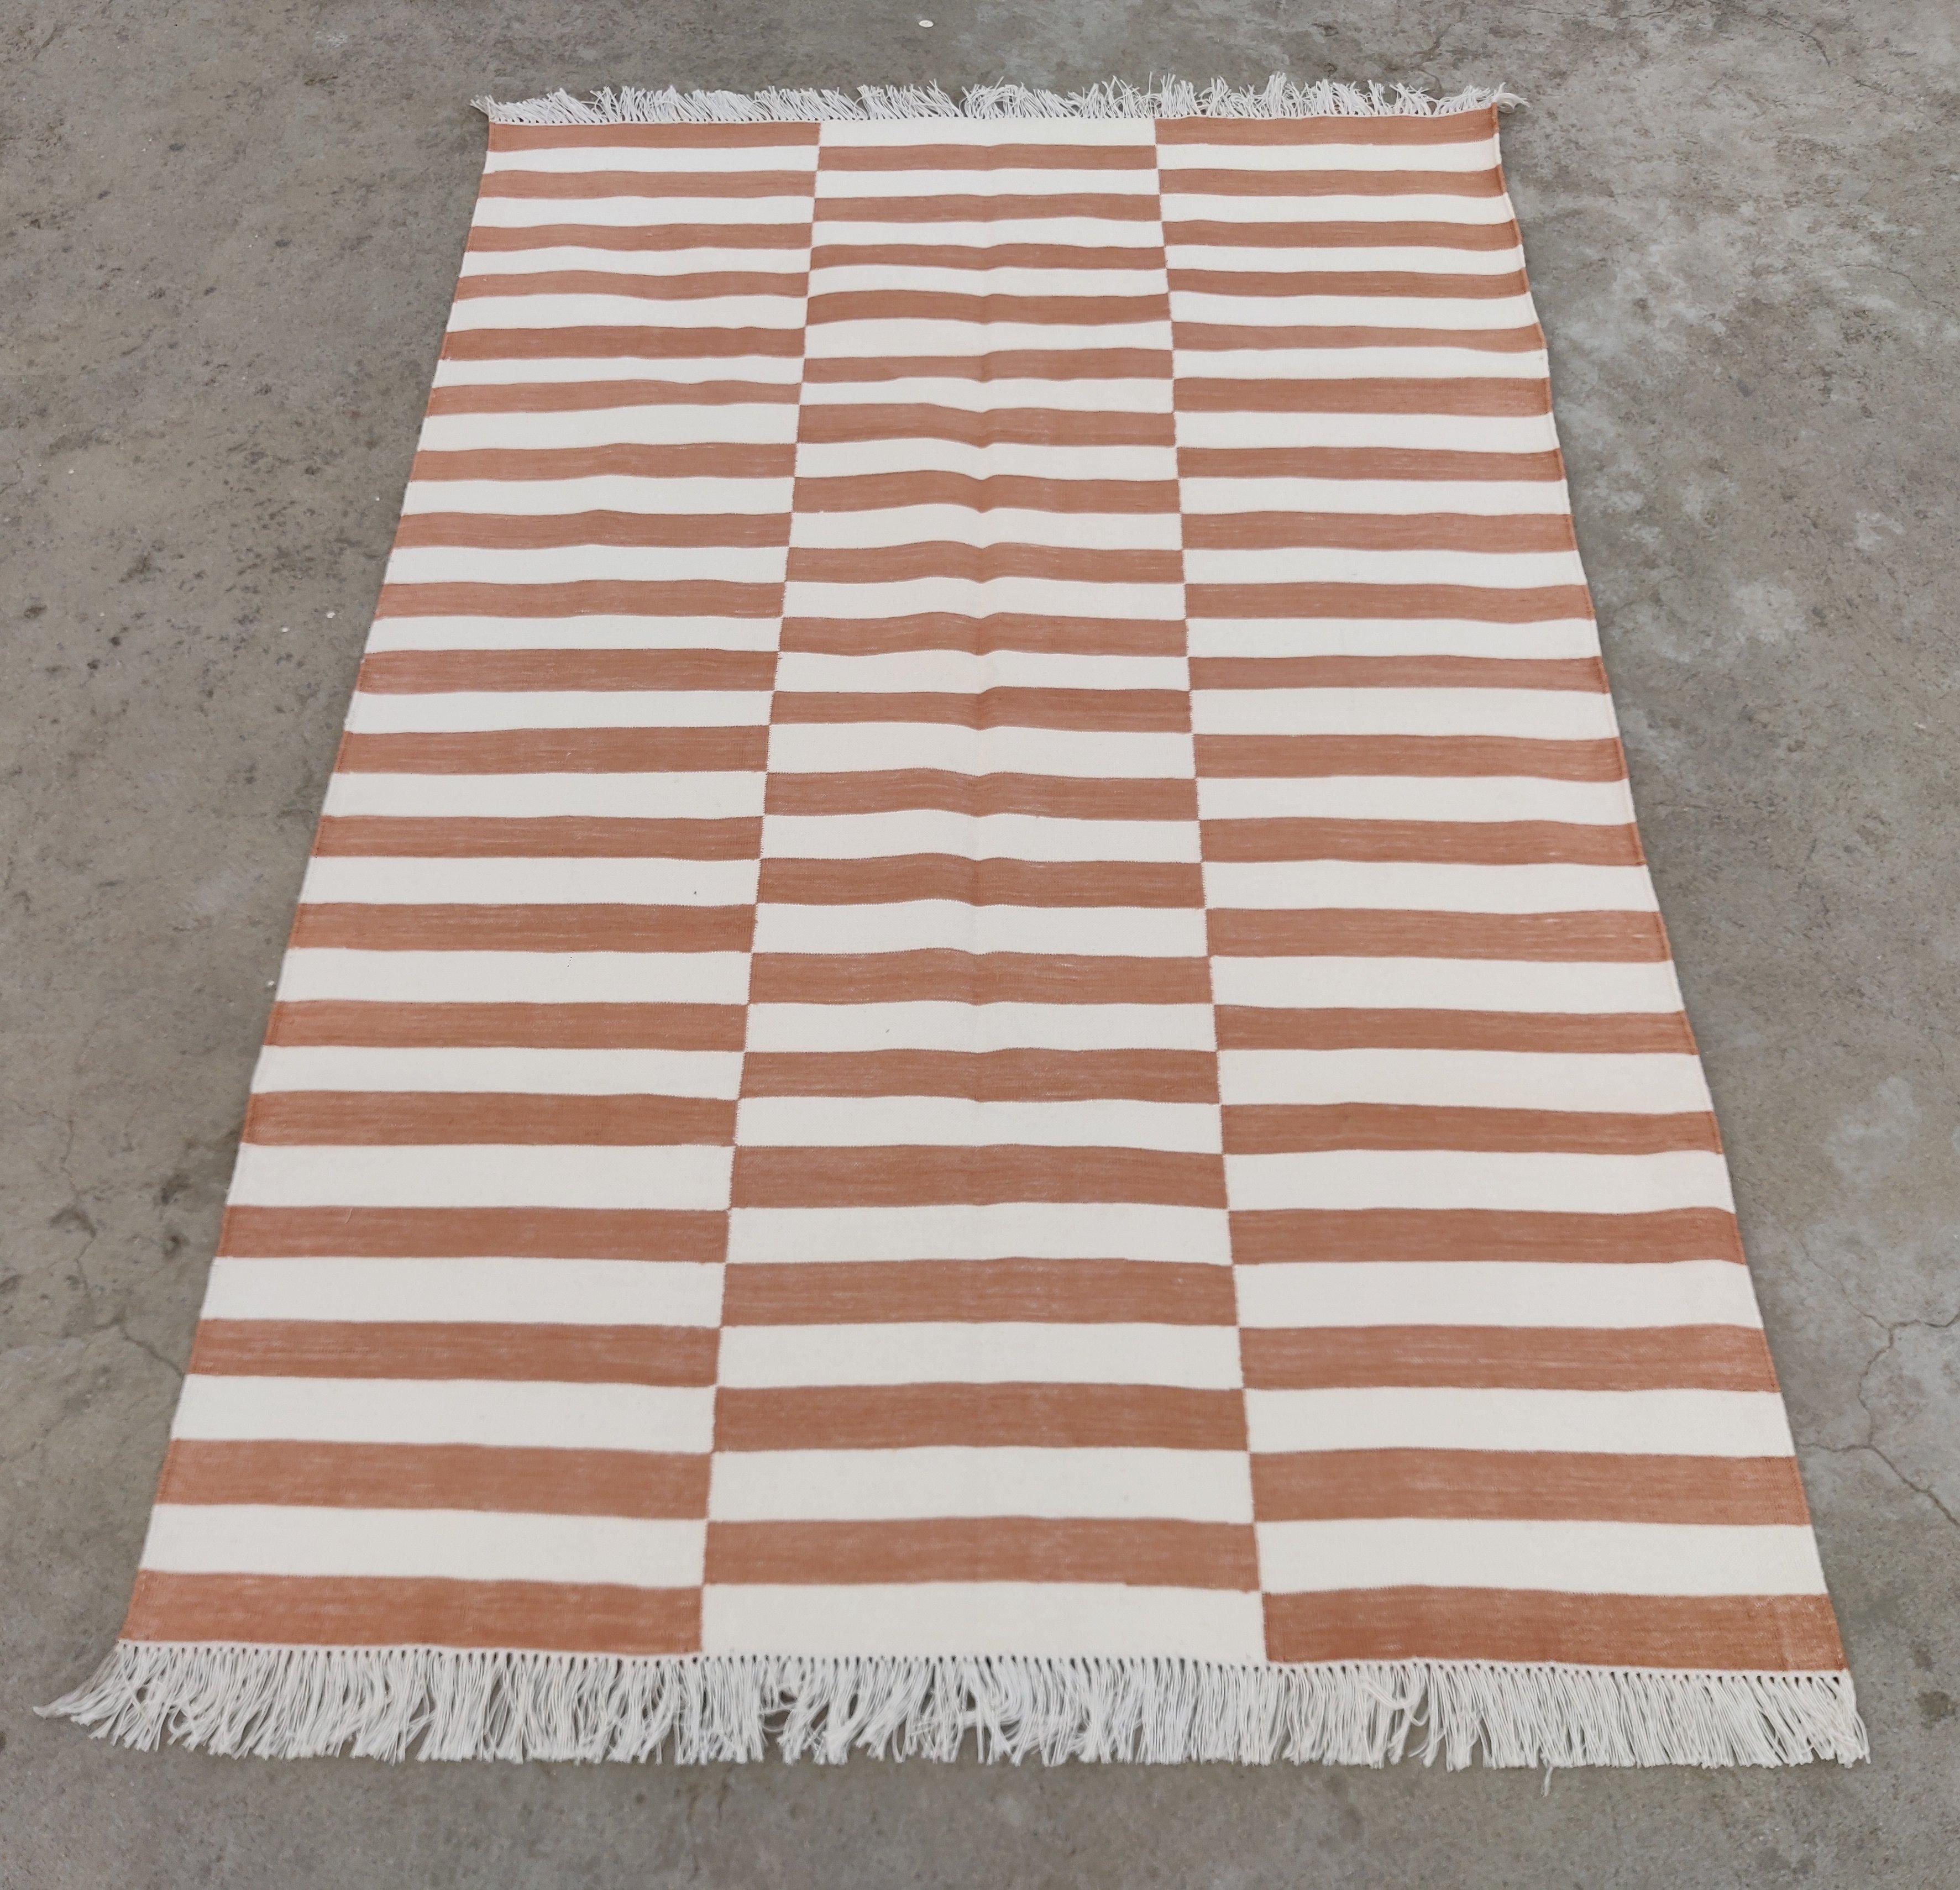 Handmade Cotton Area Flat Weave Rug, 4x6 Tan And White Striped Indian Dhurrie In New Condition For Sale In Jaipur, IN